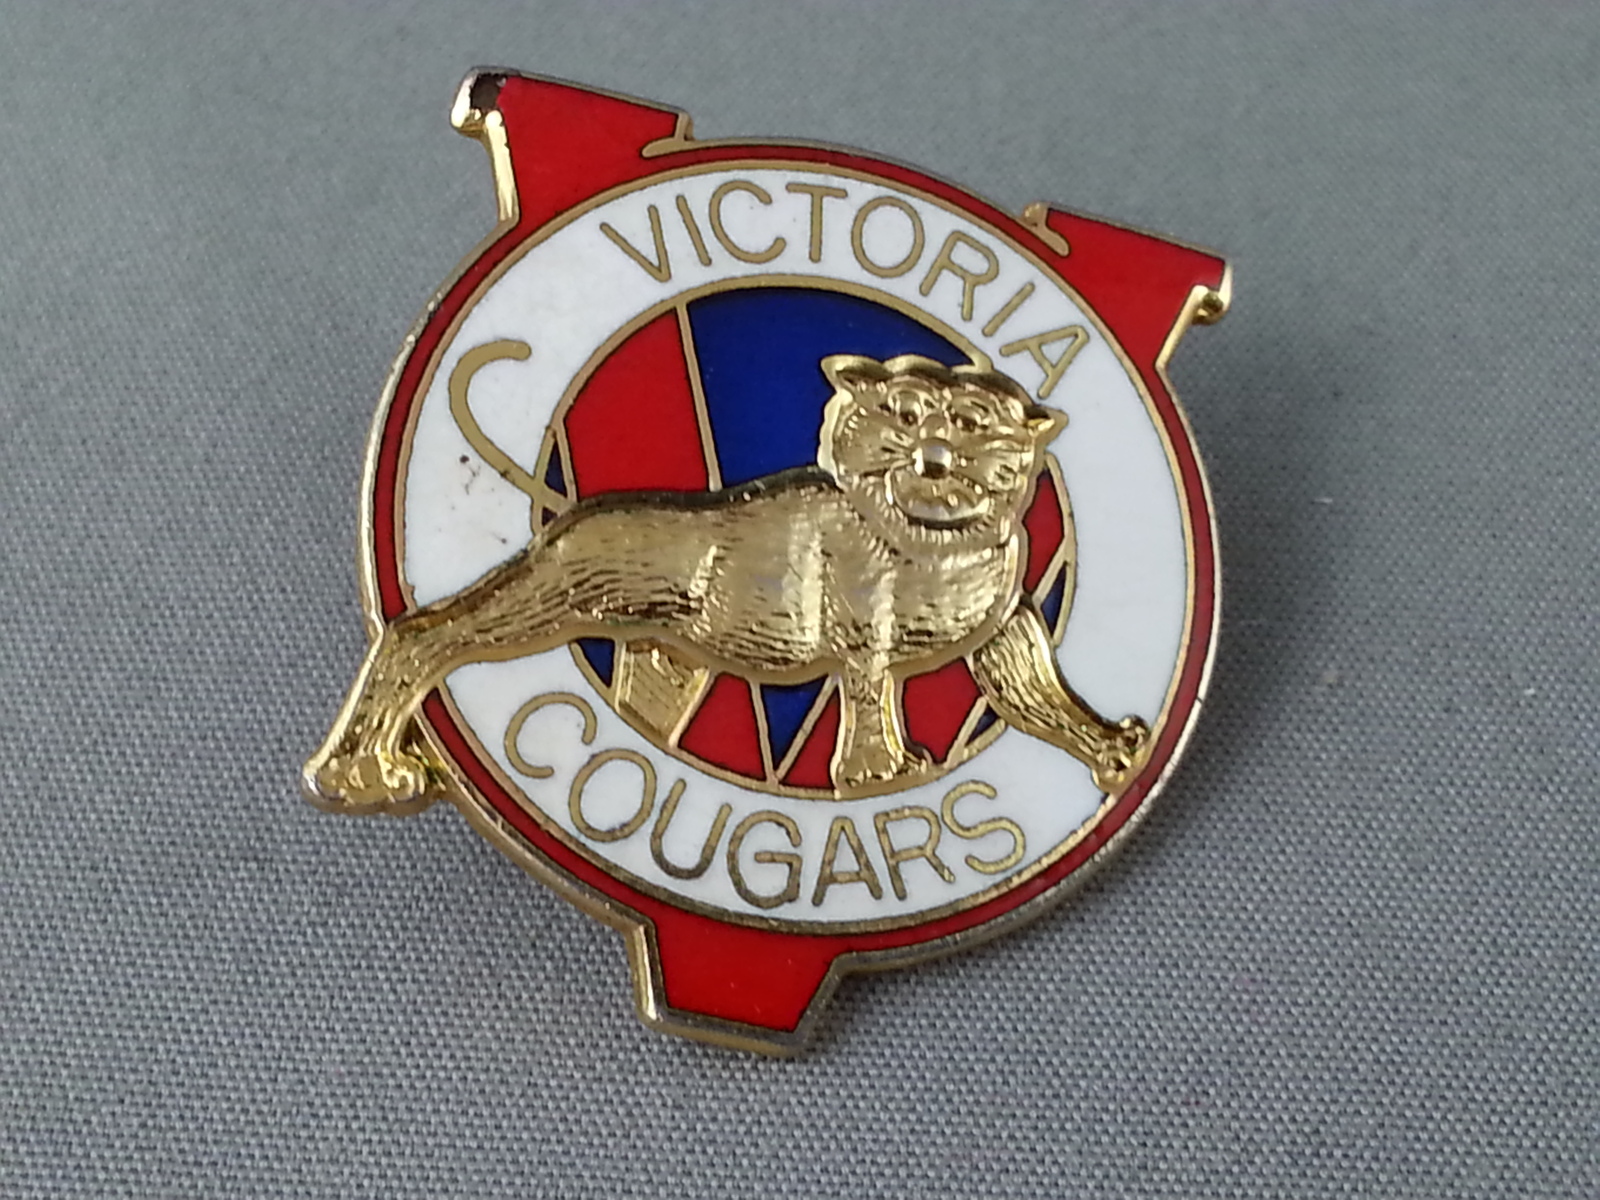 Primary image for Rare - Victoria Cougars Pin - Western Hockey League - From 1987